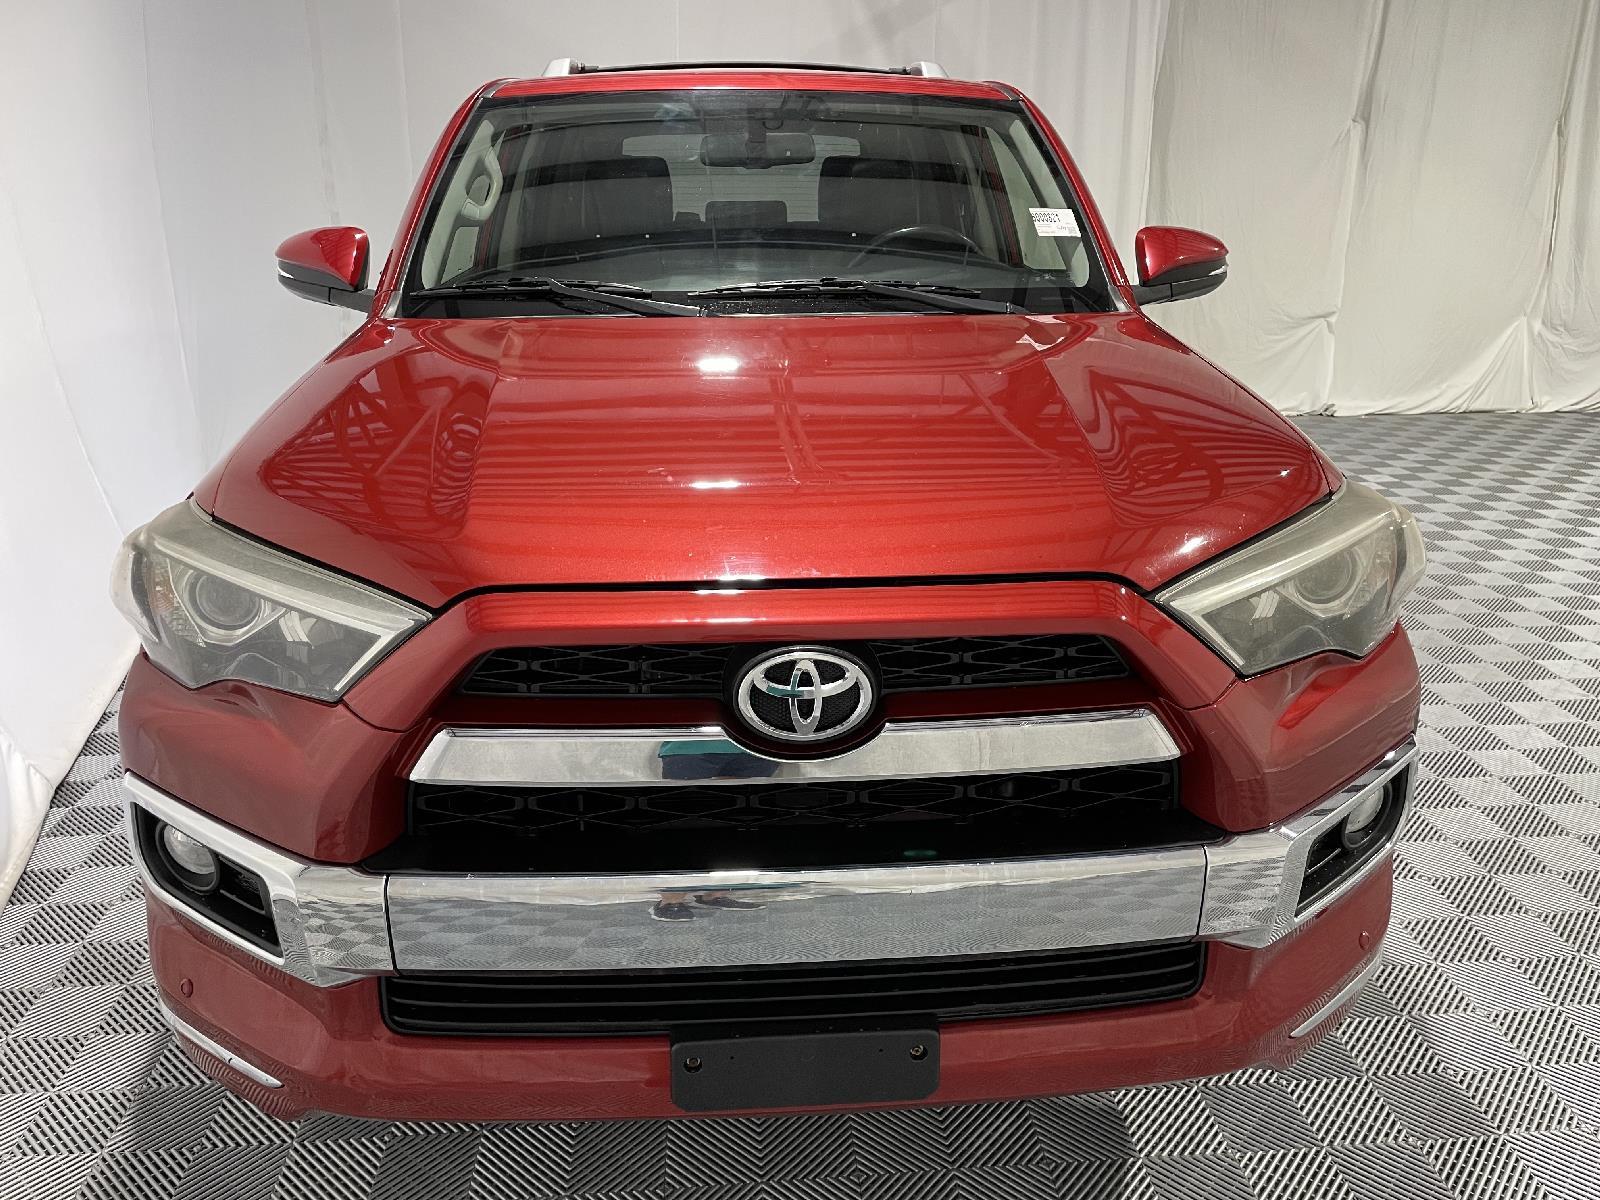 Used 2015 Toyota 4Runner Limited SUV for sale in St Joseph MO